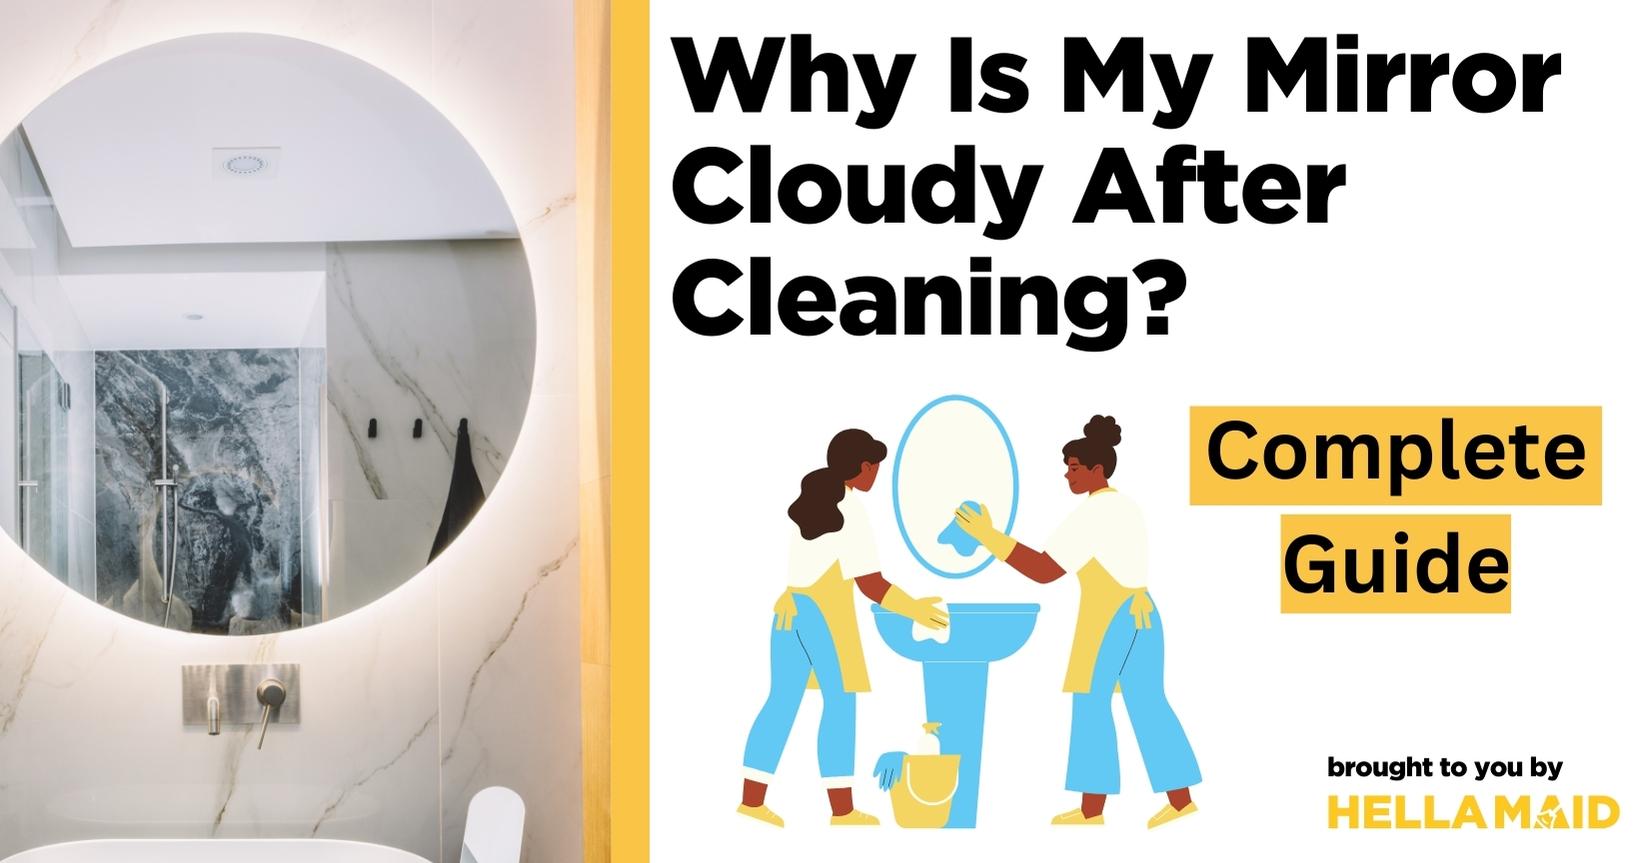 why is my mirror cloudy after cleaning?